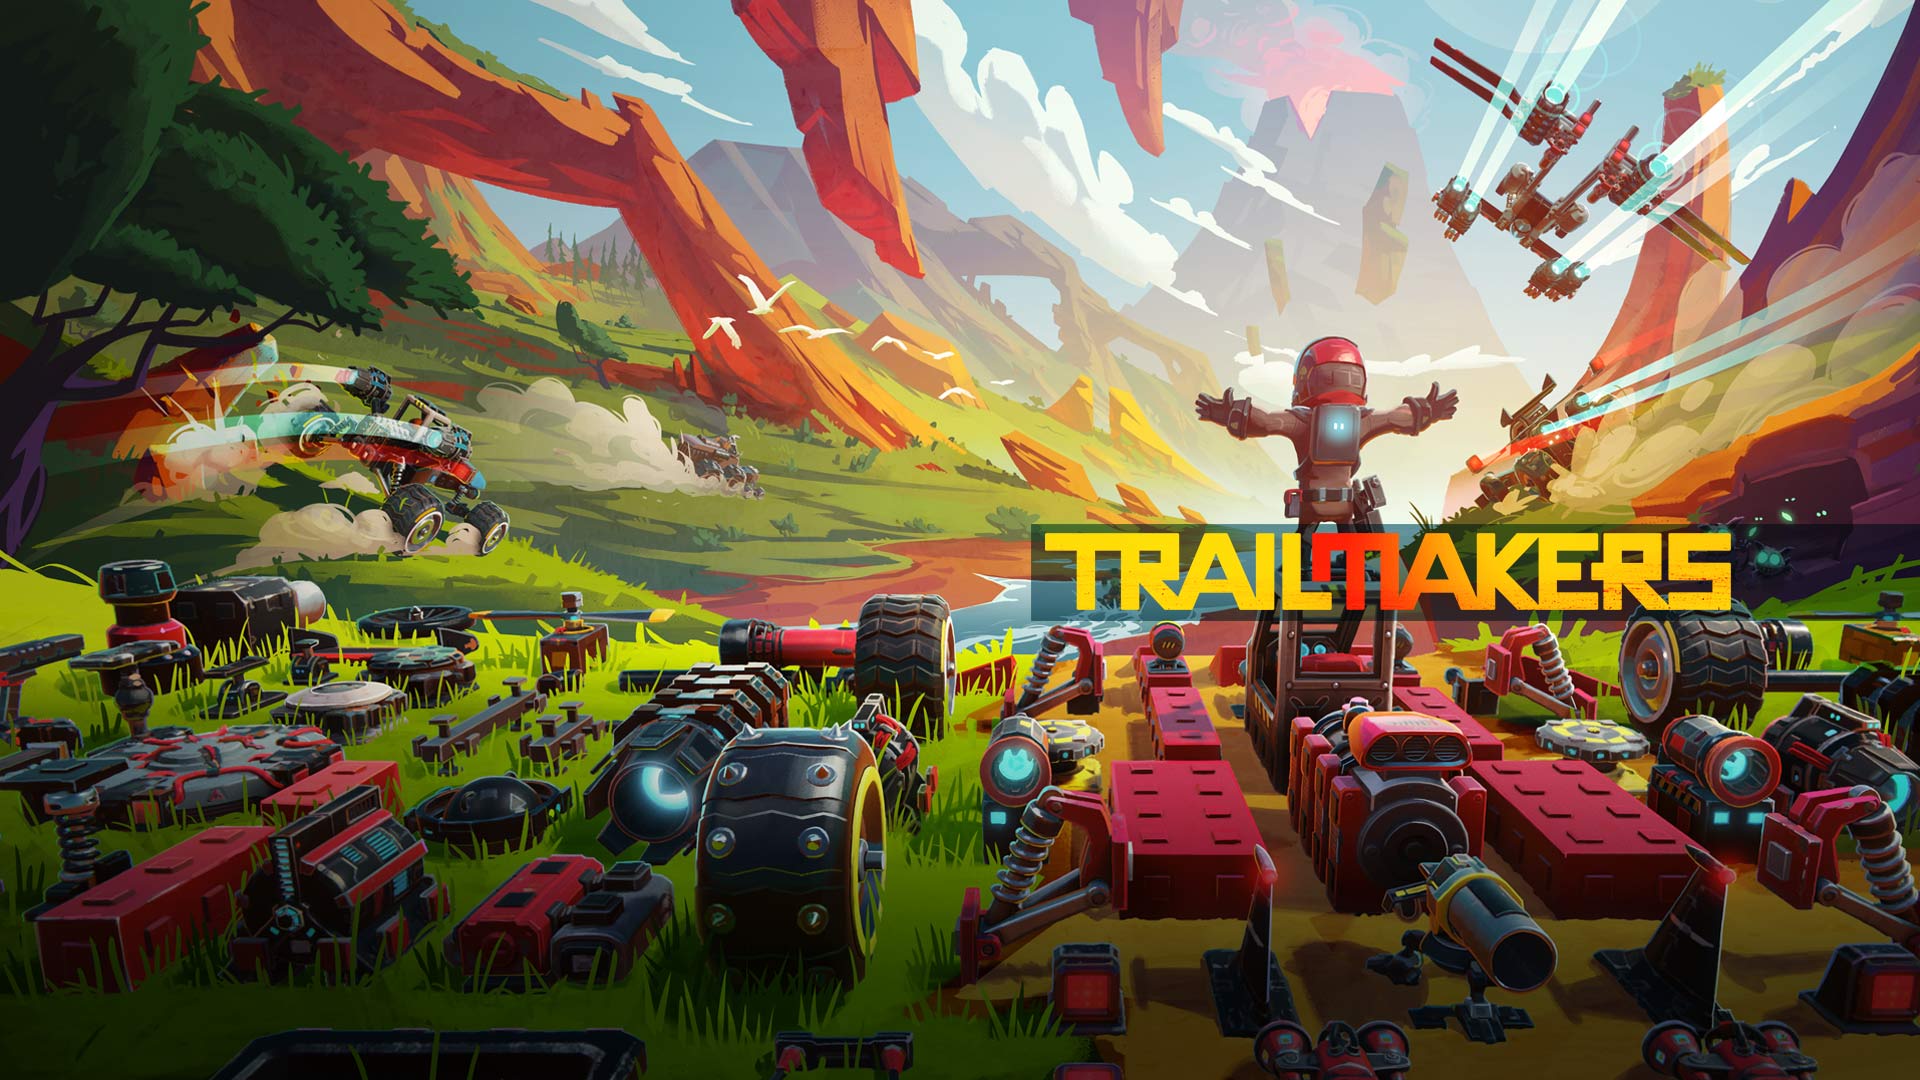 trailmakers game free